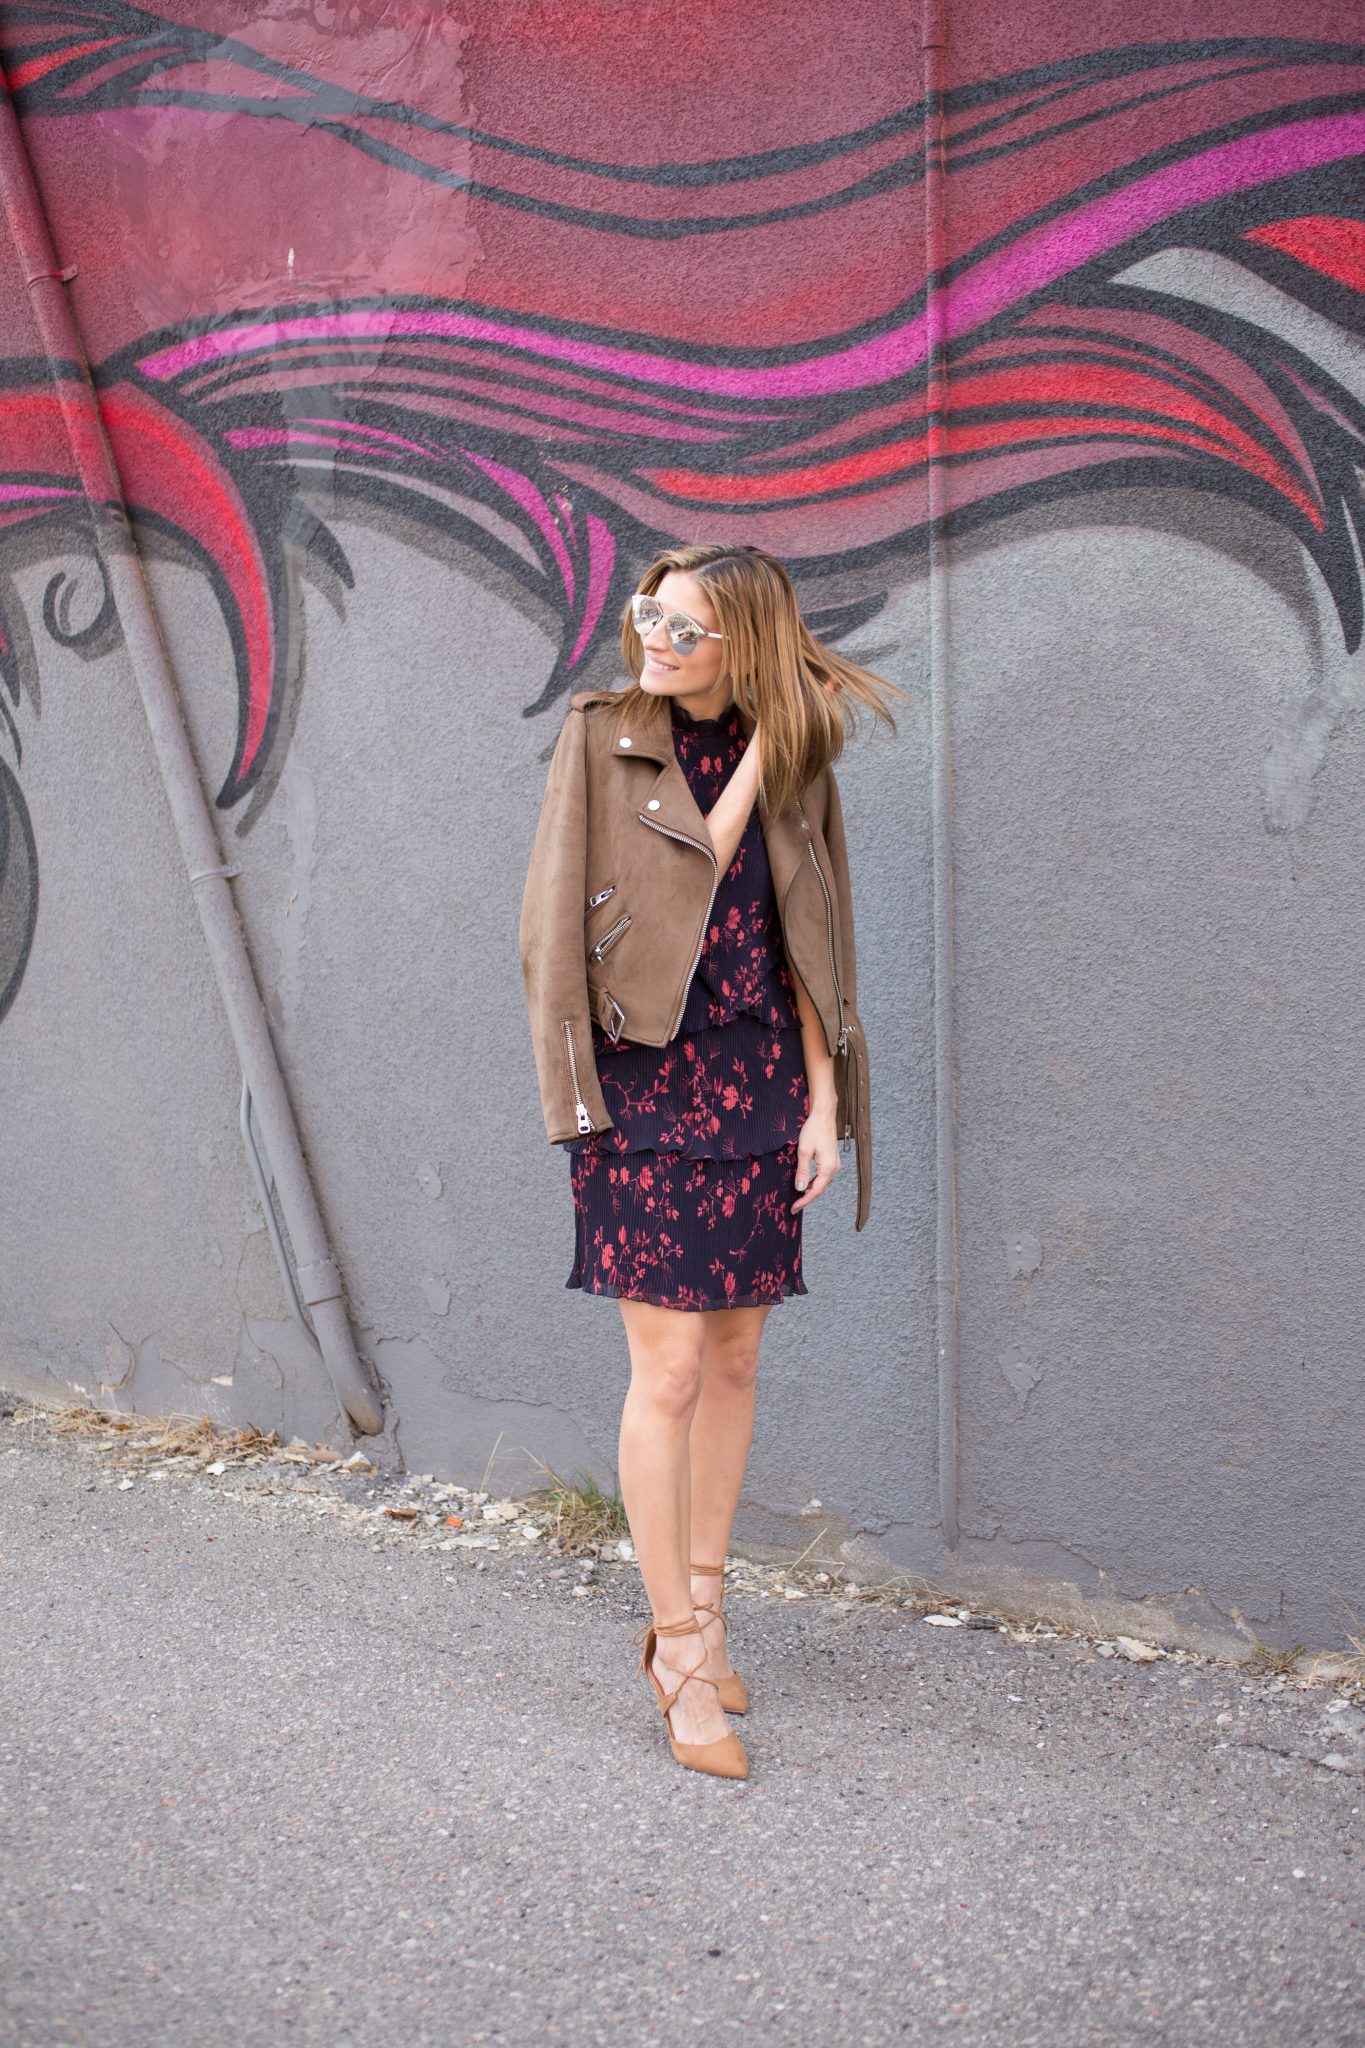 Marciano Cherry Blossom Dress, Le Chateau nude lace up heels, Zara suede moto jacket, Dior So Real Sunglasses